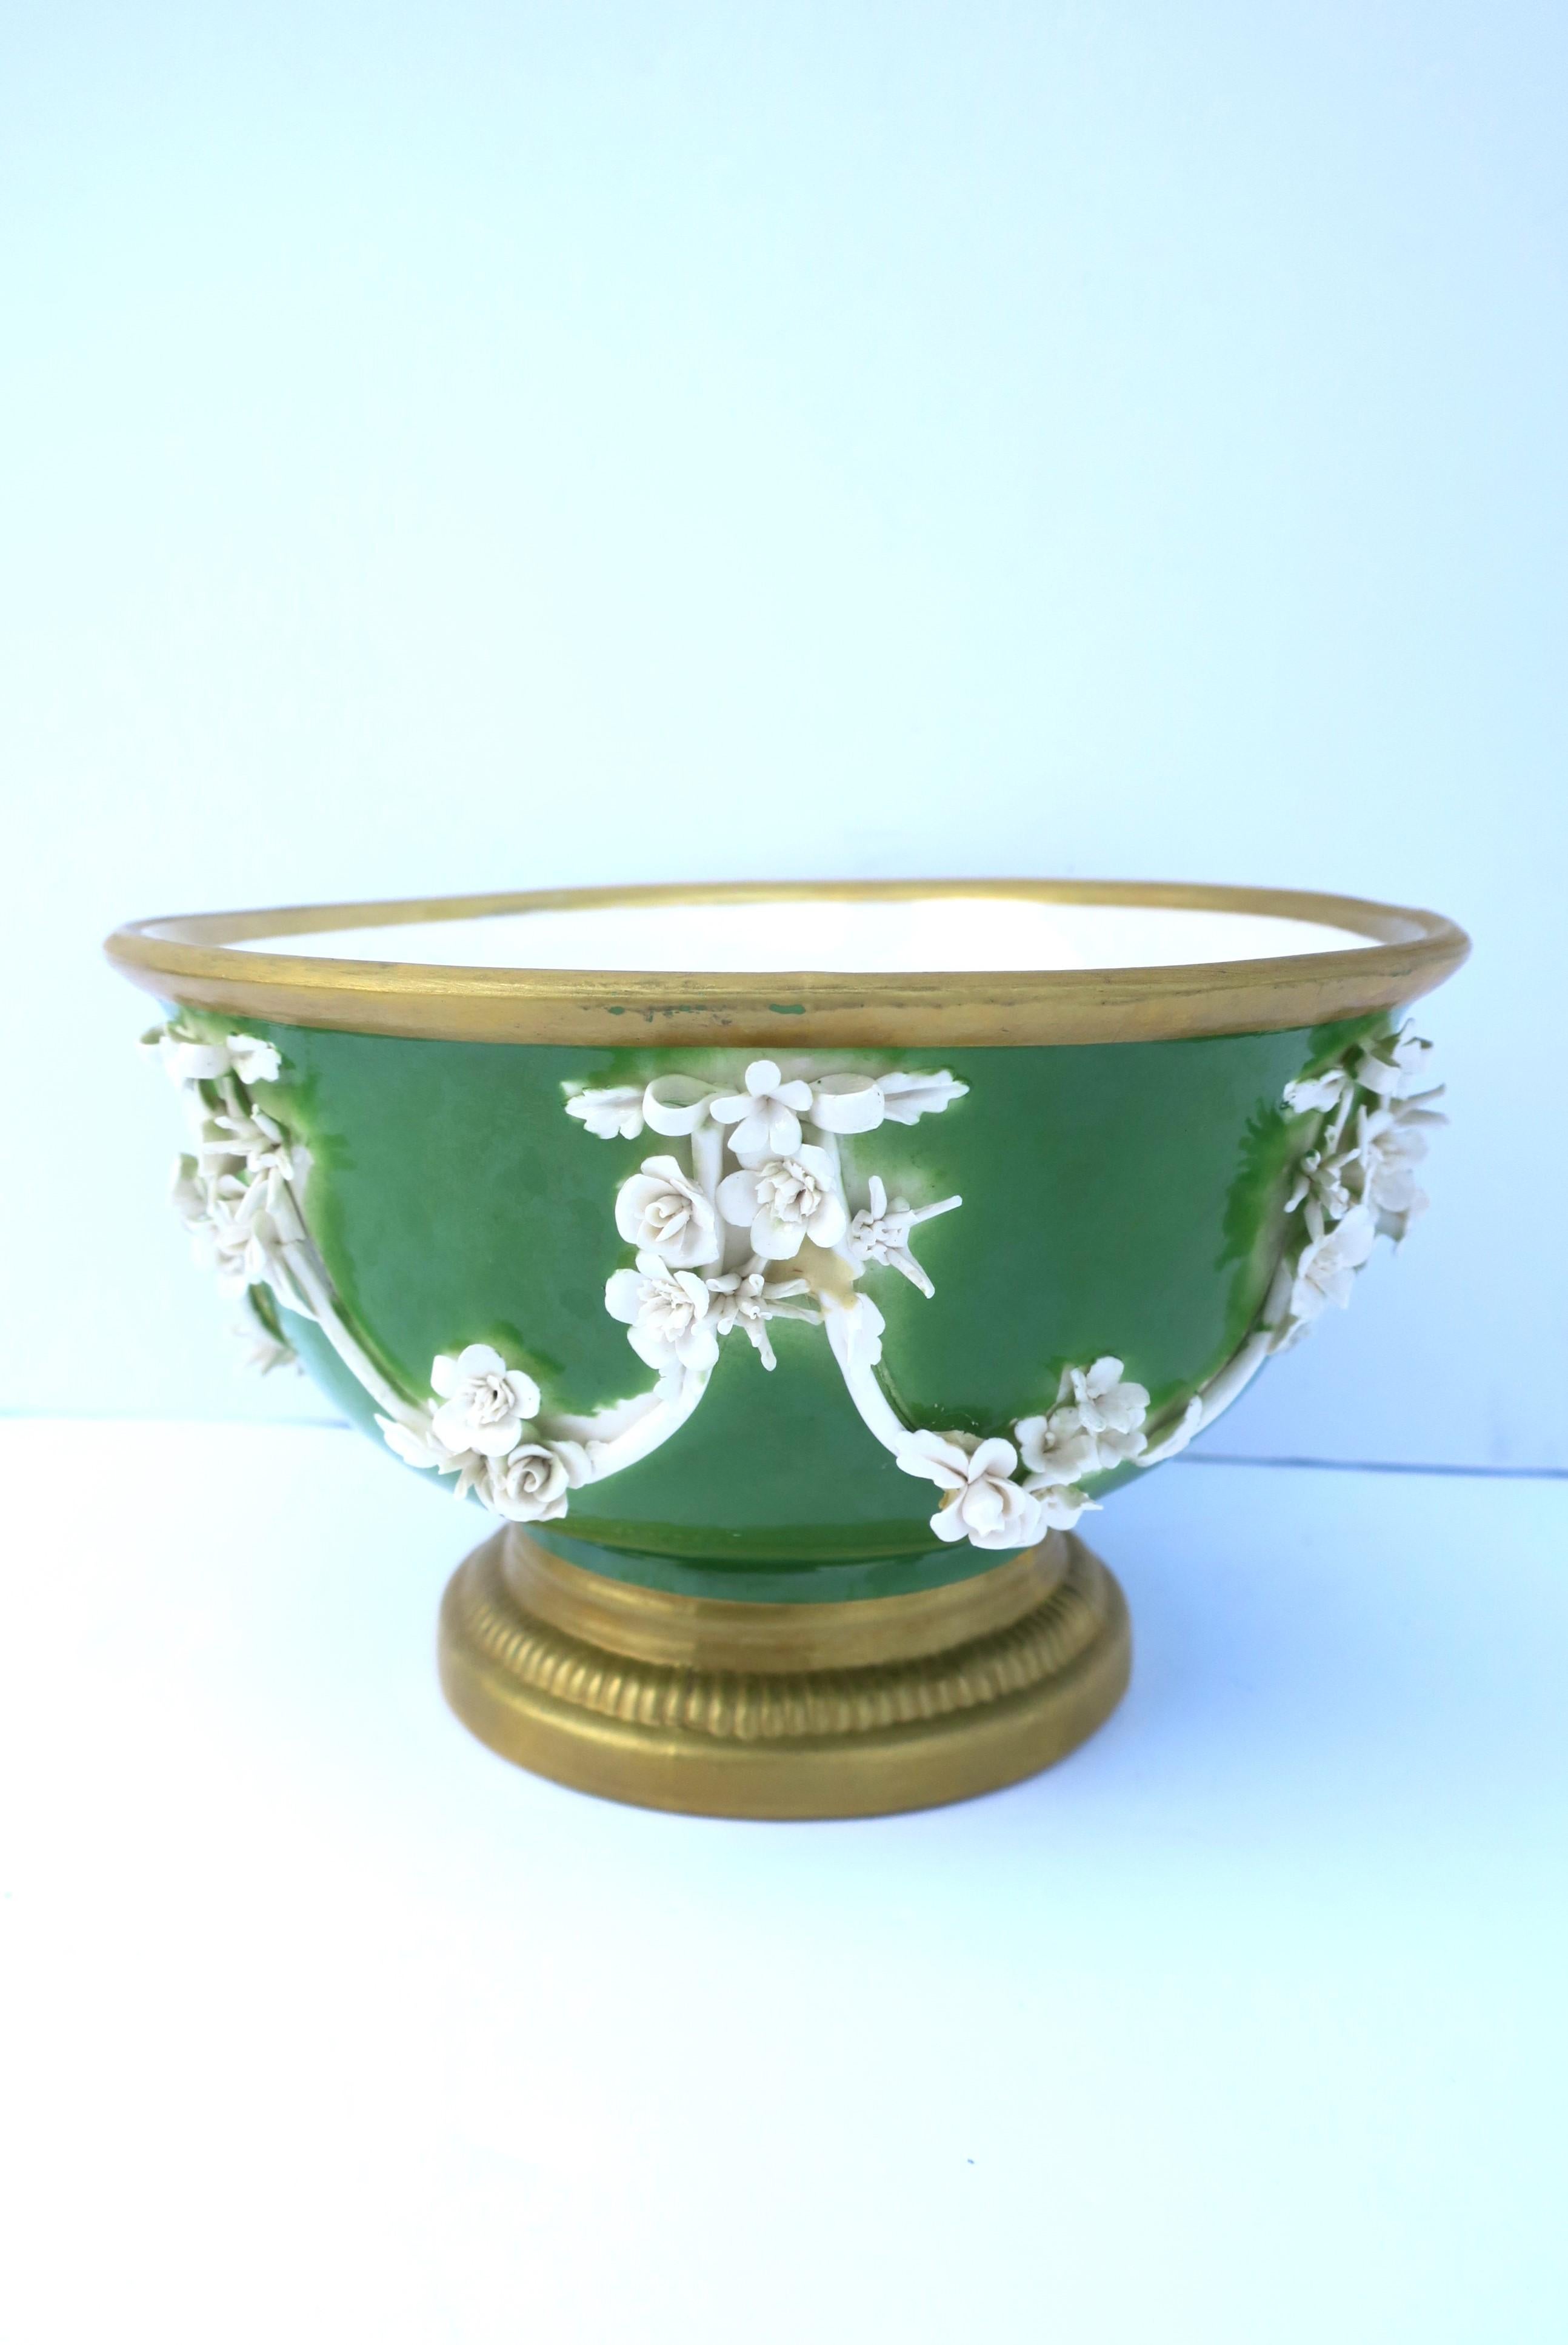 Italian Porcelain Footed Bowl Urn Neoclassical Style by Mottahedeh, 20th Century For Sale 4